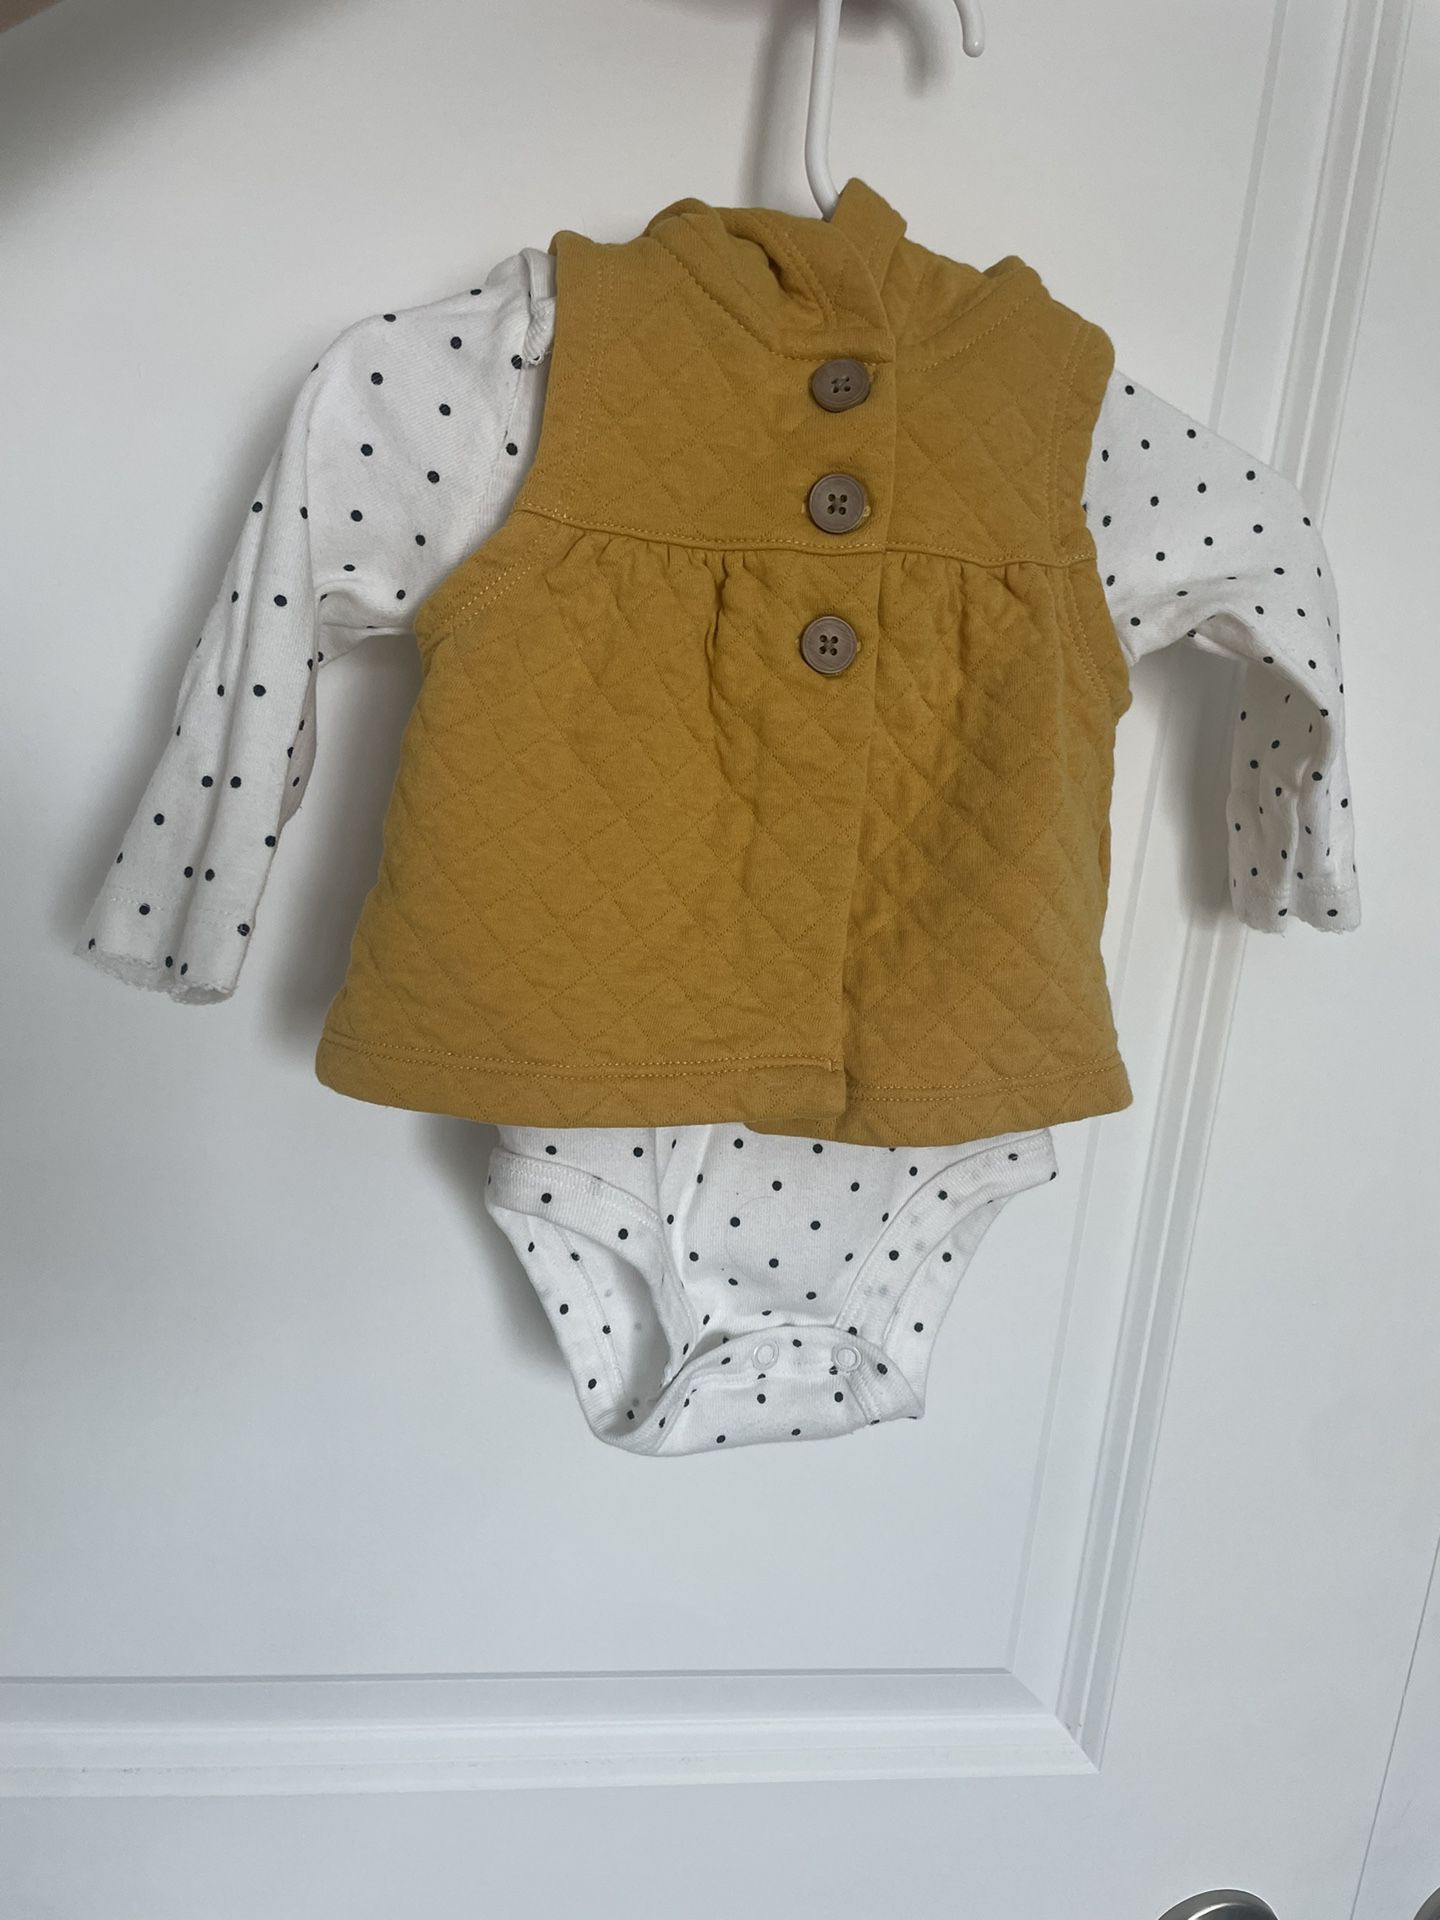 Carter’s Baby Clothes - 6 Months 